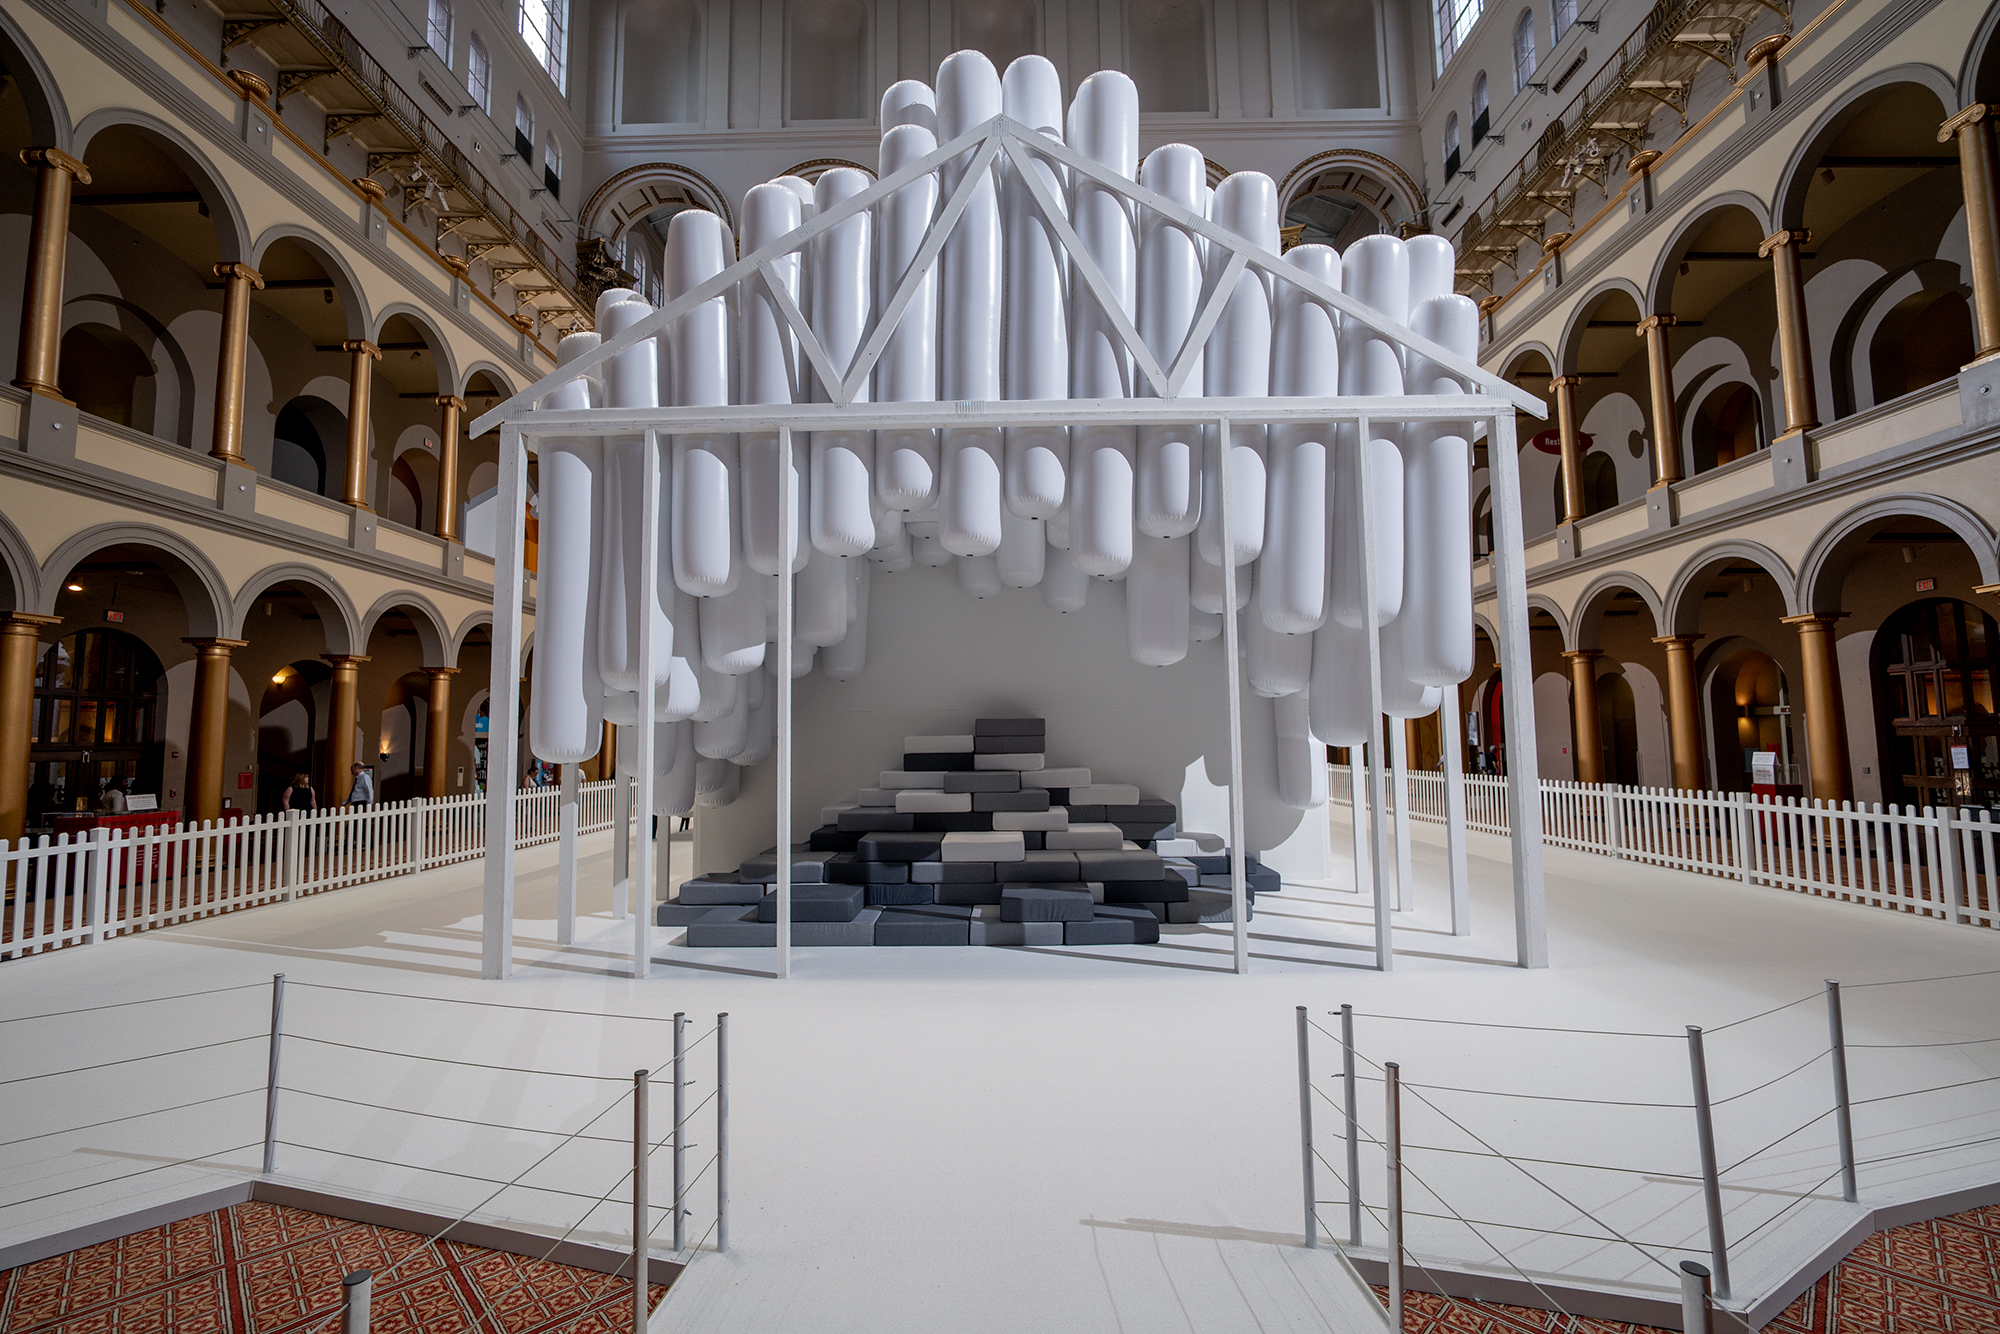 Snarkitecture's 'Fun House' at the National Building Museum